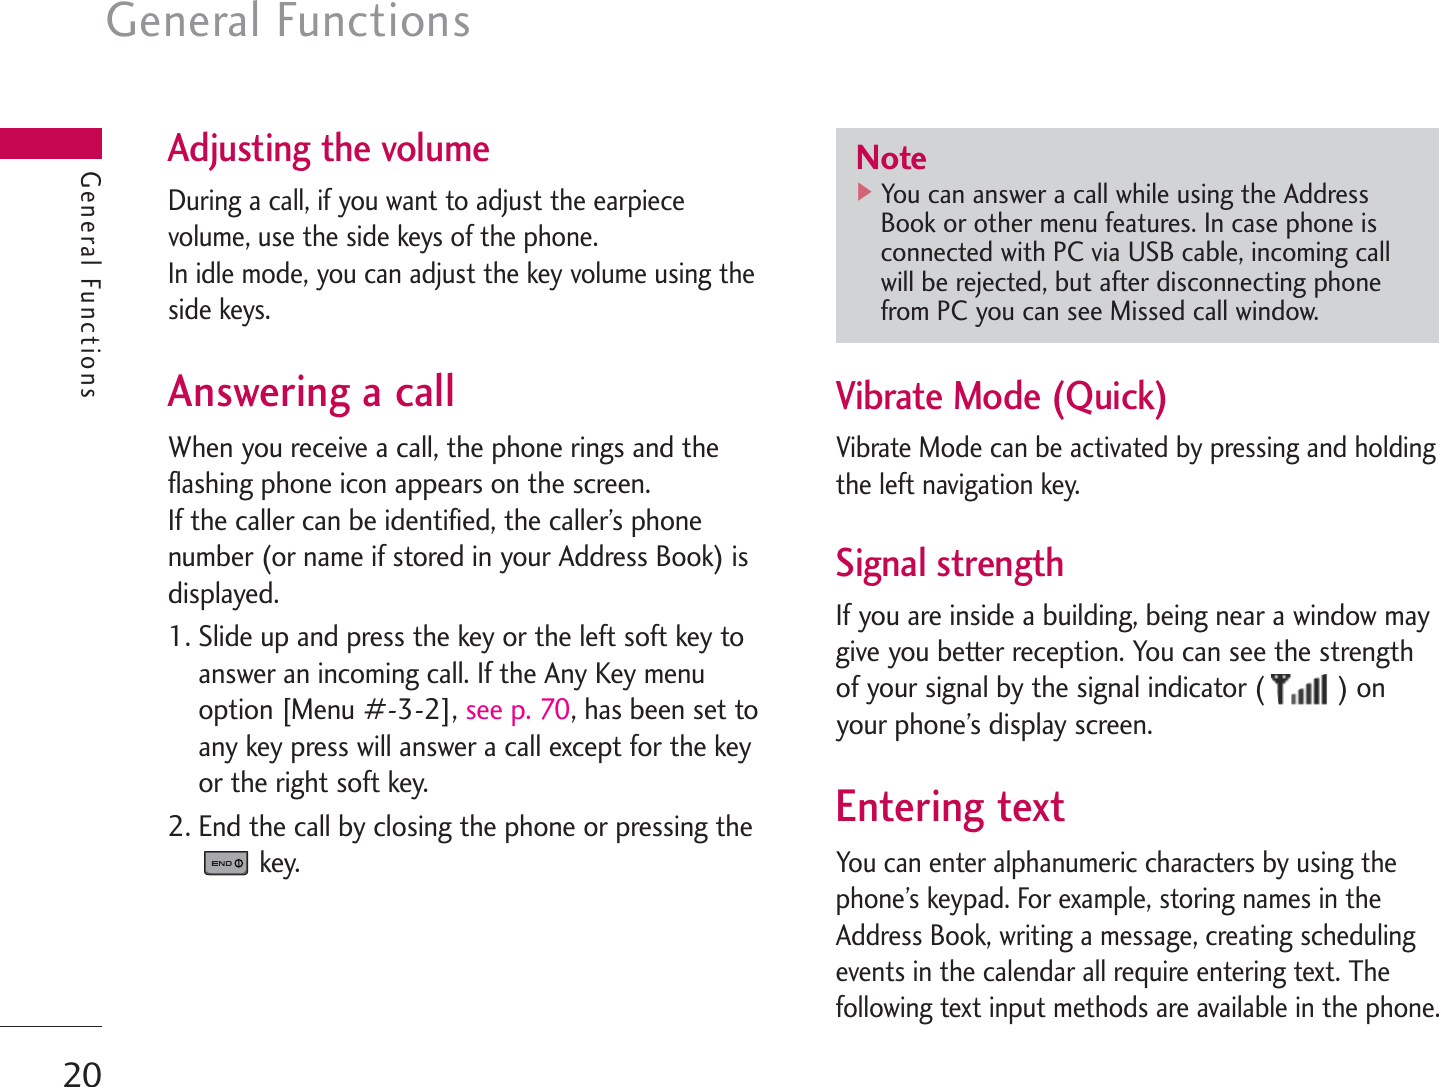 General Functions20General FunctionsAdjusting the volumeDuring a call, if you want to adjust the earpiecevolume, use the side keys of the phone.In idle mode, you can adjust the key volume using theside keys.Answering a callWhen you receive a call, the phone rings and theflashing phone icon appears on the screen.If the caller can be identified, the caller’s phonenumber (or name if stored in your Address Book) isdisplayed.1. Slide up and press the key or the left soft key toanswer an incoming call. If the Any Key menuoption [Menu #-3-2], see p. 70, has been set toany key press will answer a call except for the keyor the right soft key.2. End the call by closing the phone or pressing thekey.Vibrate Mode (Quick)Vibrate Mode can be activated by pressing and holdingthe left navigation key.Signal strengthIf you are inside a building, being near a window maygive you better reception. You can see the strengthof your signal by the signal indicator ( ) onyour phone’s display screen.Entering textYou can enter alphanumeric characters by using thephone’s keypad. For example, storing names in theAddress Book, writing a message, creating schedulingevents in the calendar all require entering text. Thefollowing text input methods are available in the phone.Note]You can answer a call while using the AddressBook or other menu features. In case phone isconnected with PC via USB cable, incoming callwill be rejected, but after disconnecting phonefrom PC you can see Missed call window.